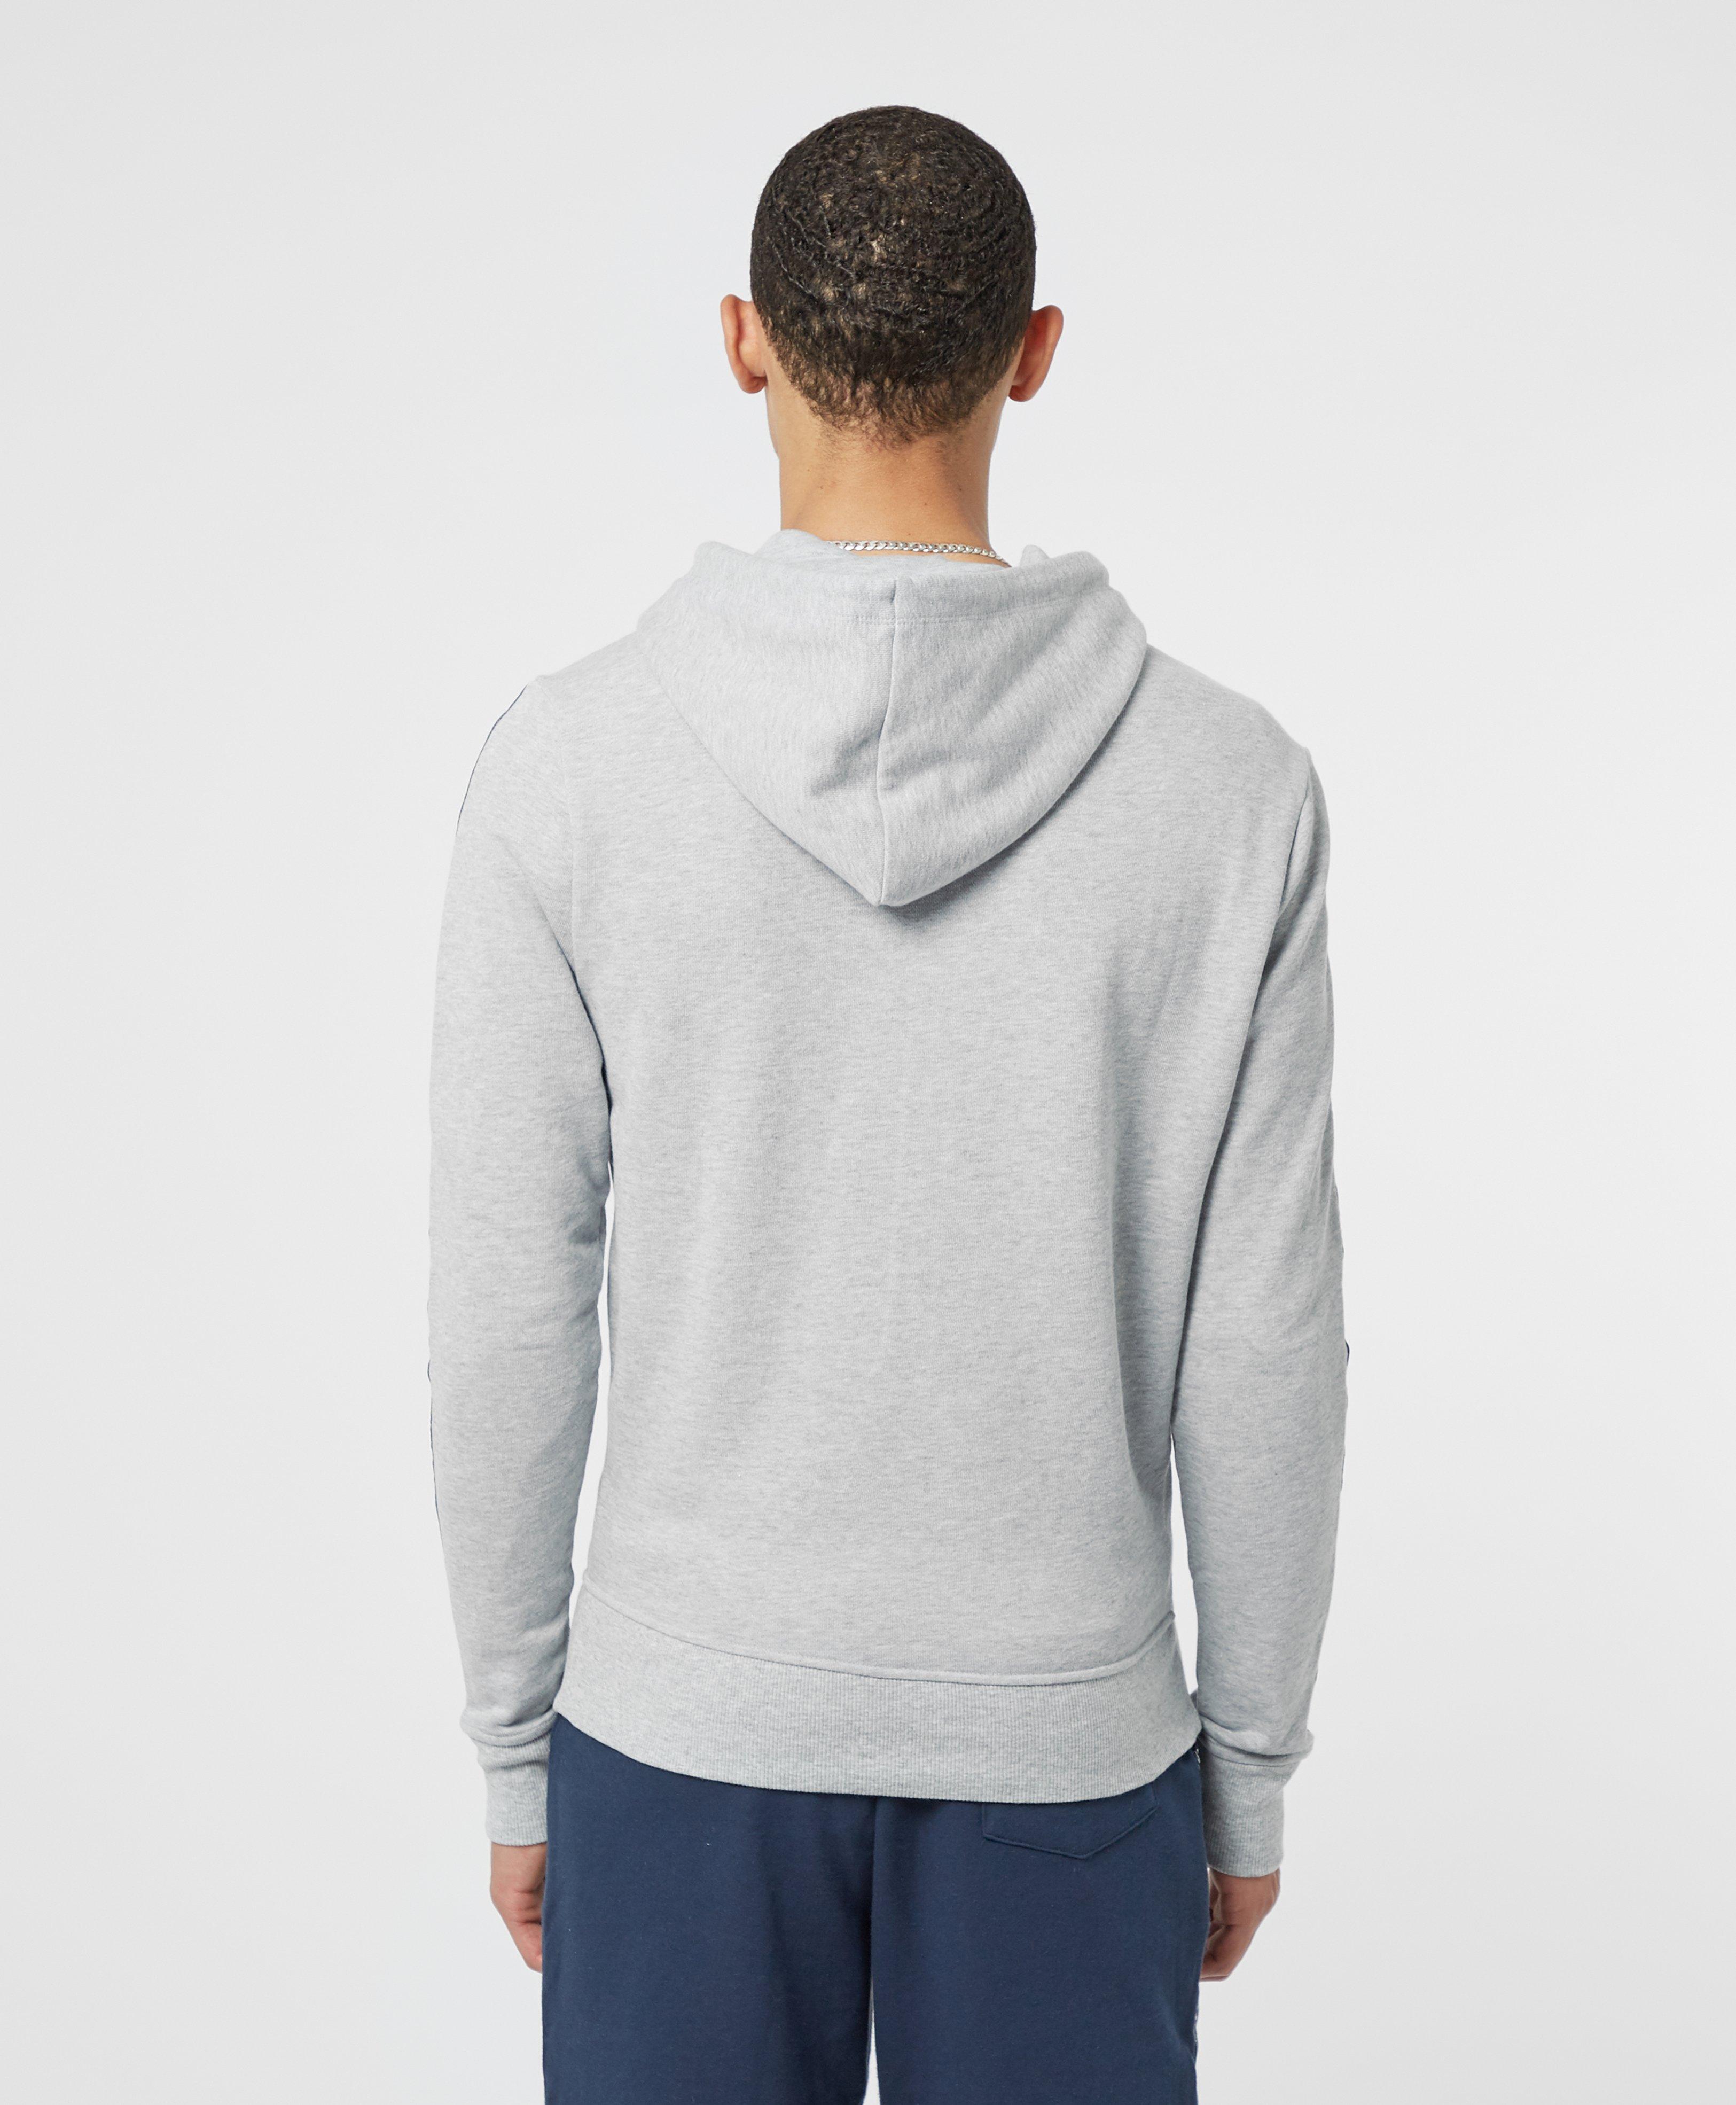 Tommy Hilfiger Authentic Tape Full Zip Hoodie in Grey (Gray) for Men - Lyst